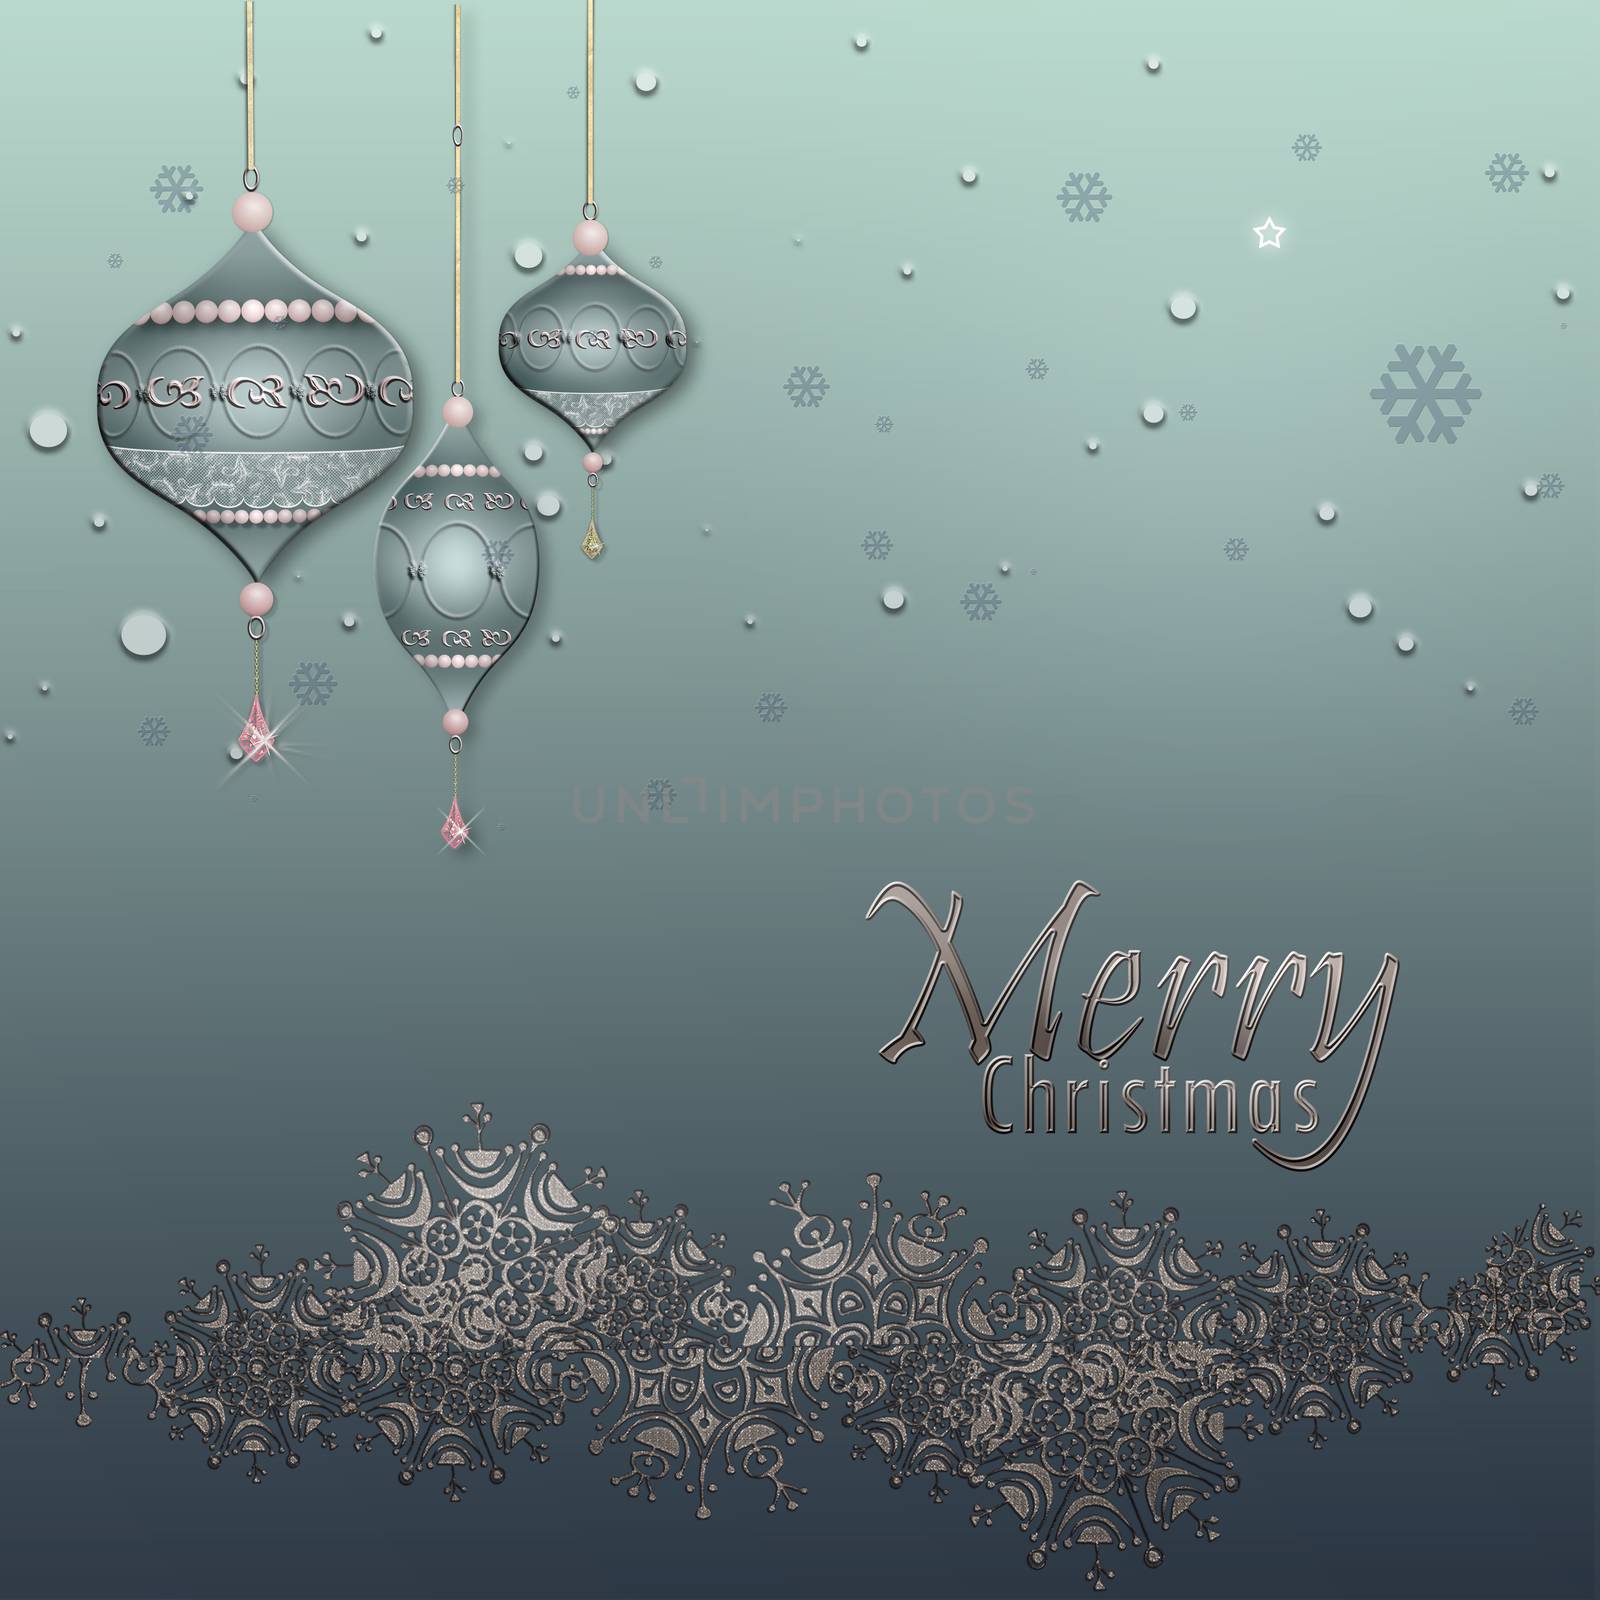 Christmas and Happy New Year Background with silver border of snowflakes, luxury blue baubles balls on pastel green metallic background. Text Merry Christmas. 3D illustration